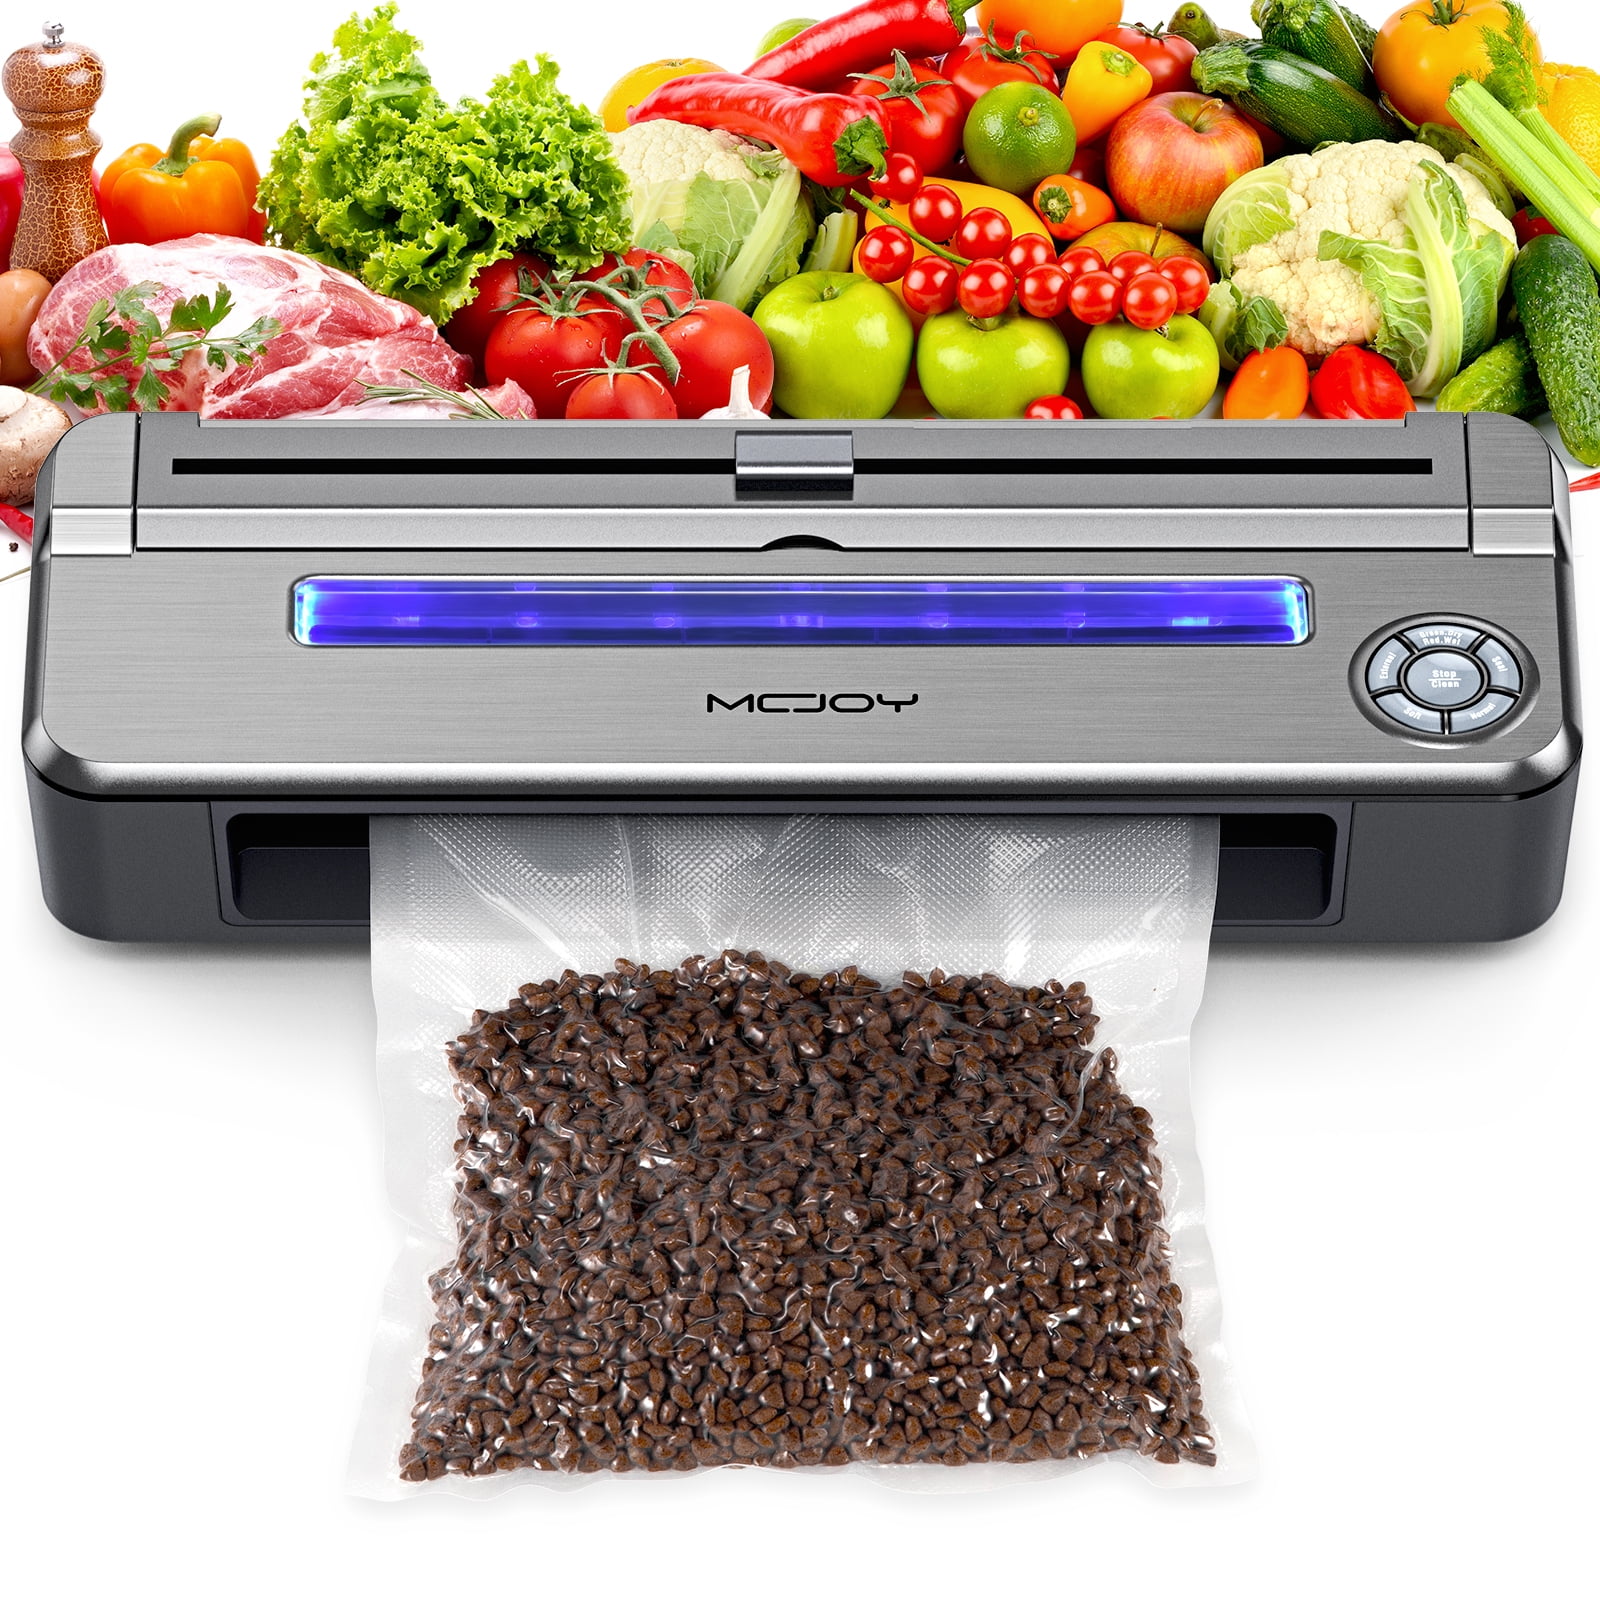 Ficcug 12 Inch Automatic Food Vacuum Sealer Machine with 10 Vacuum Sealer  Bags,60 Kpa Electric Air Sealing Preserver System With Dry & Moist Fresh  Modes for For All Food Saving Needs,Black 